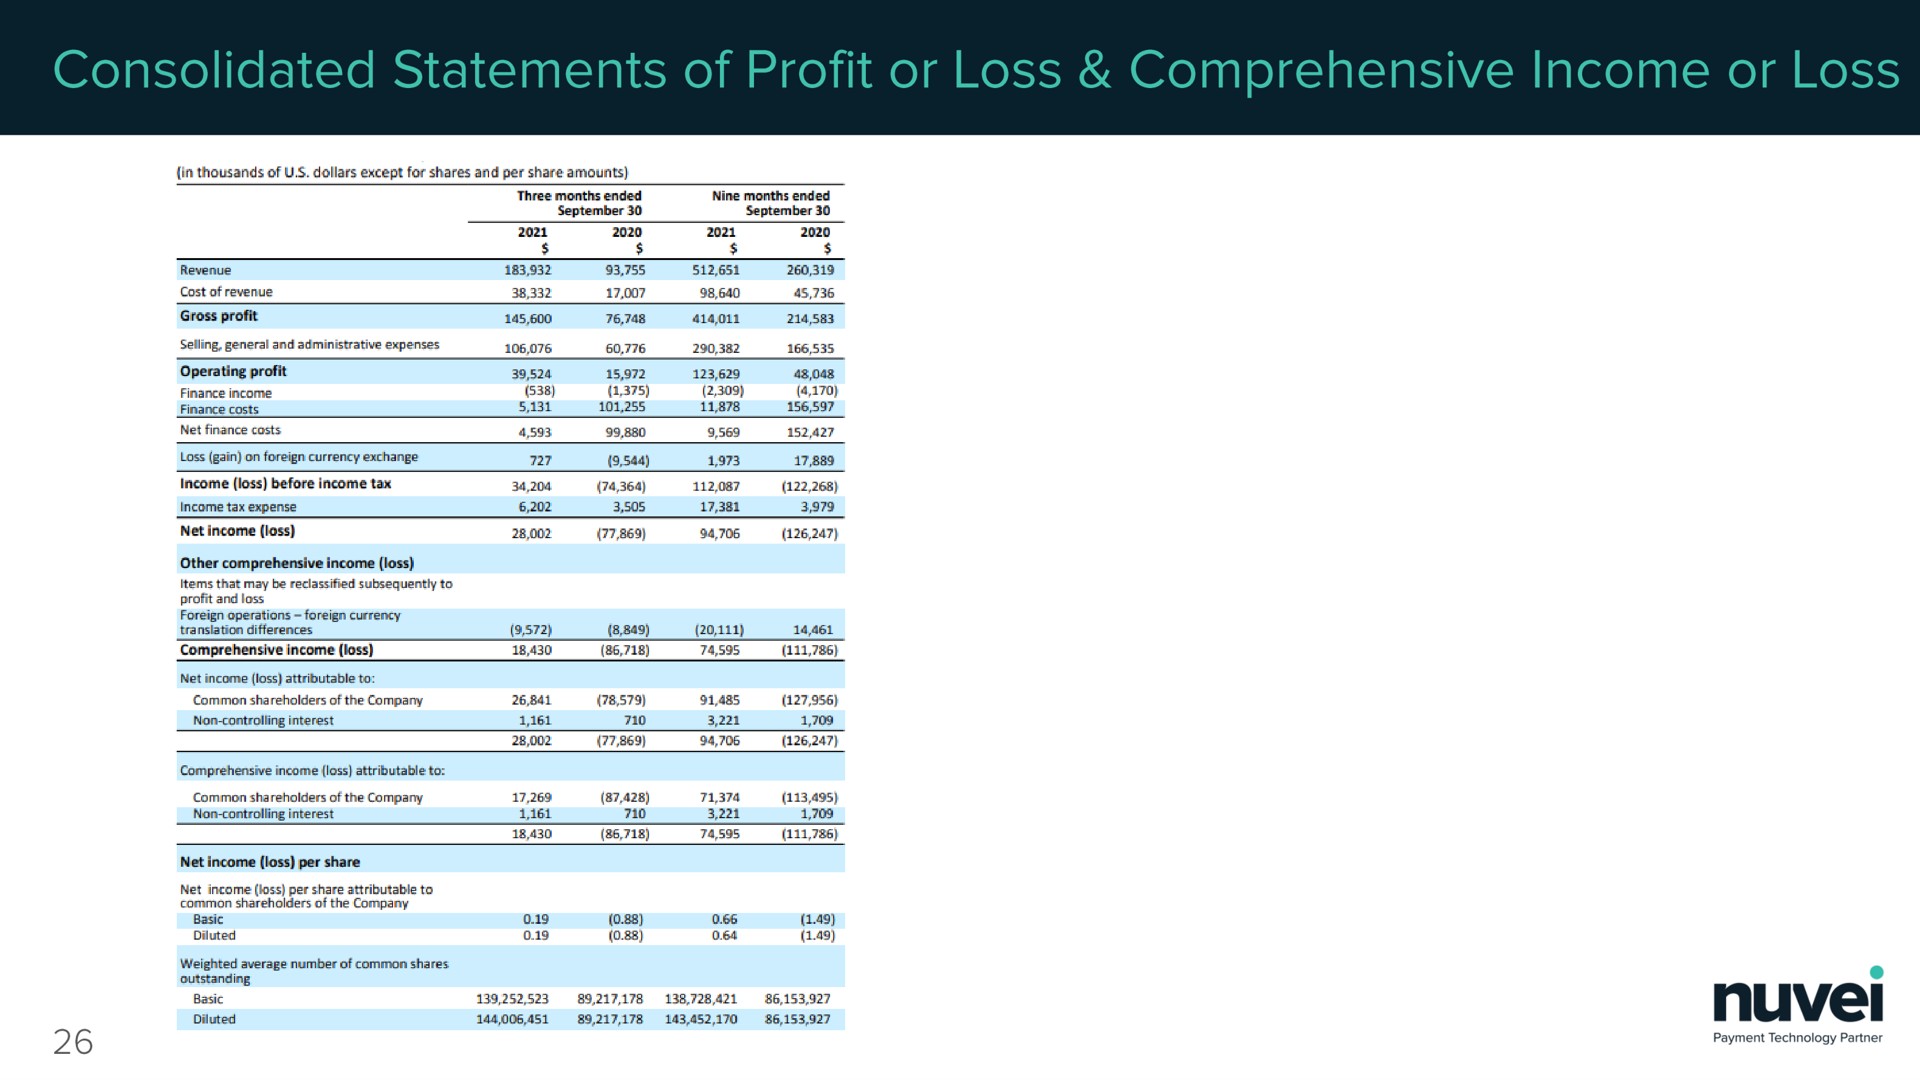 consolidated statements of profit or loss comprehensive income or loss | Nuvei